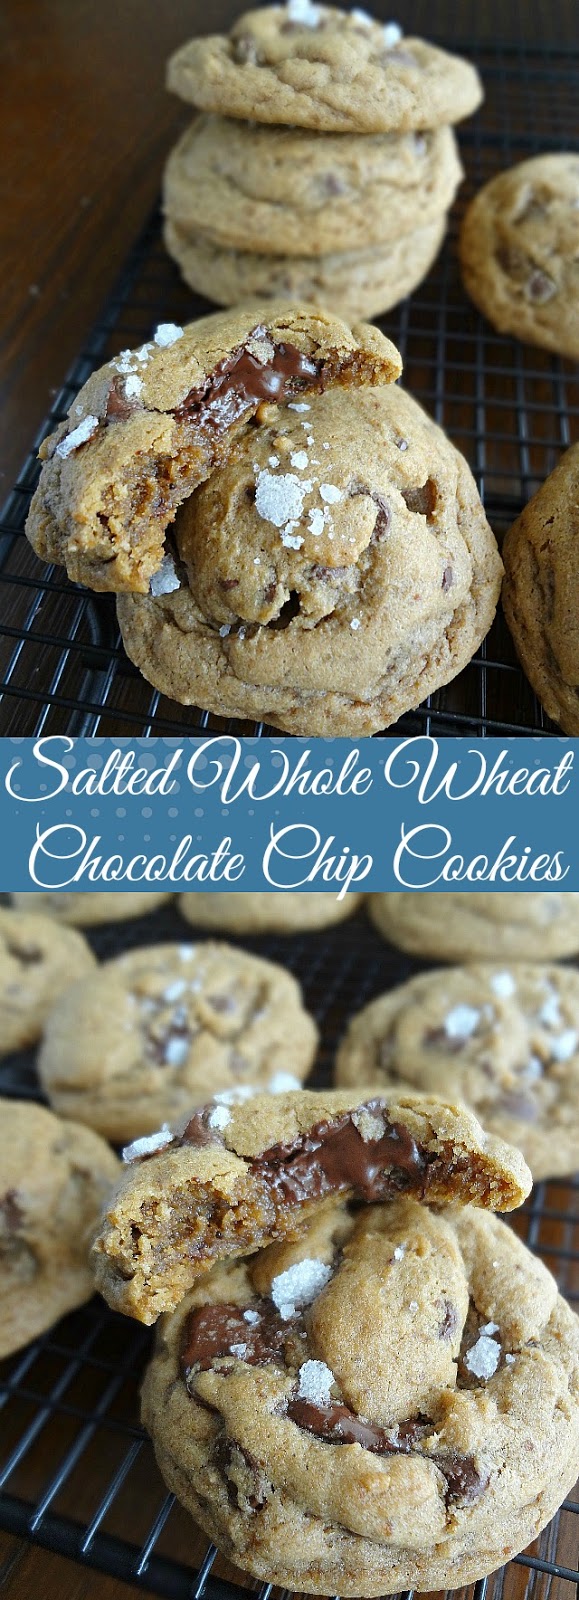 Salted Whole Wheat Chocolate Chip Cookies